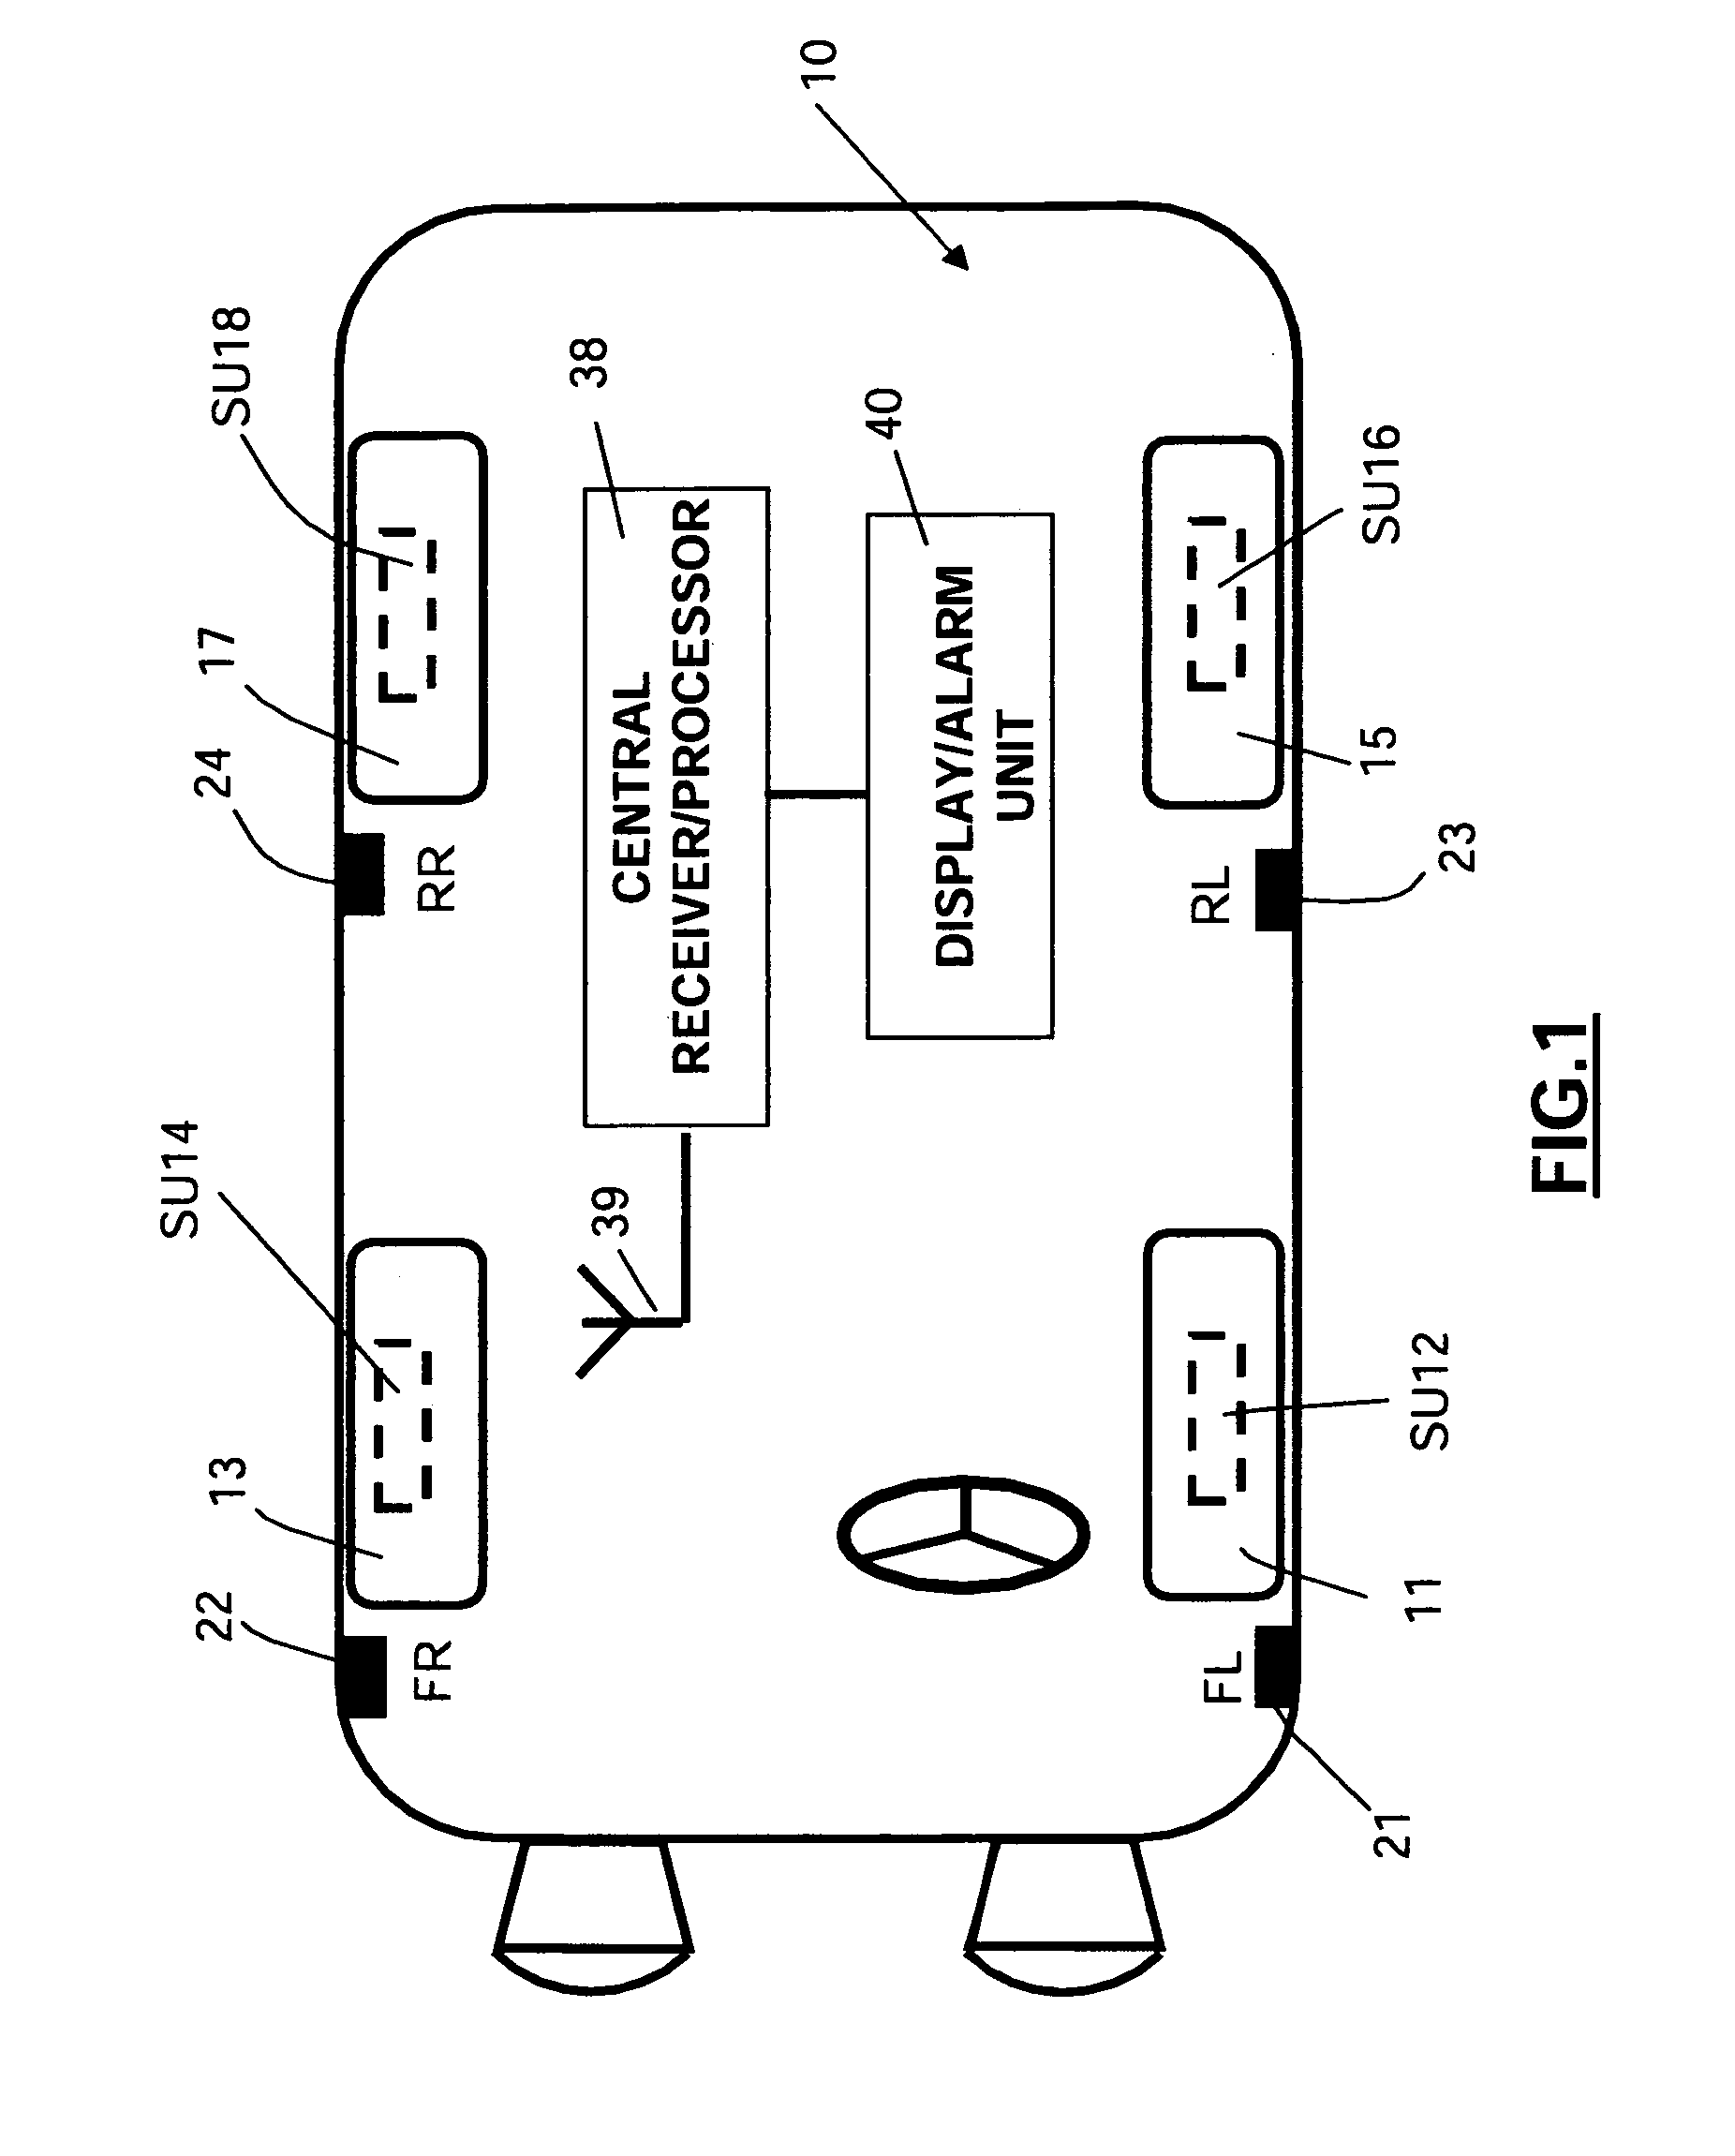 Tire parameter monitoring system with sensor location using RFID tags